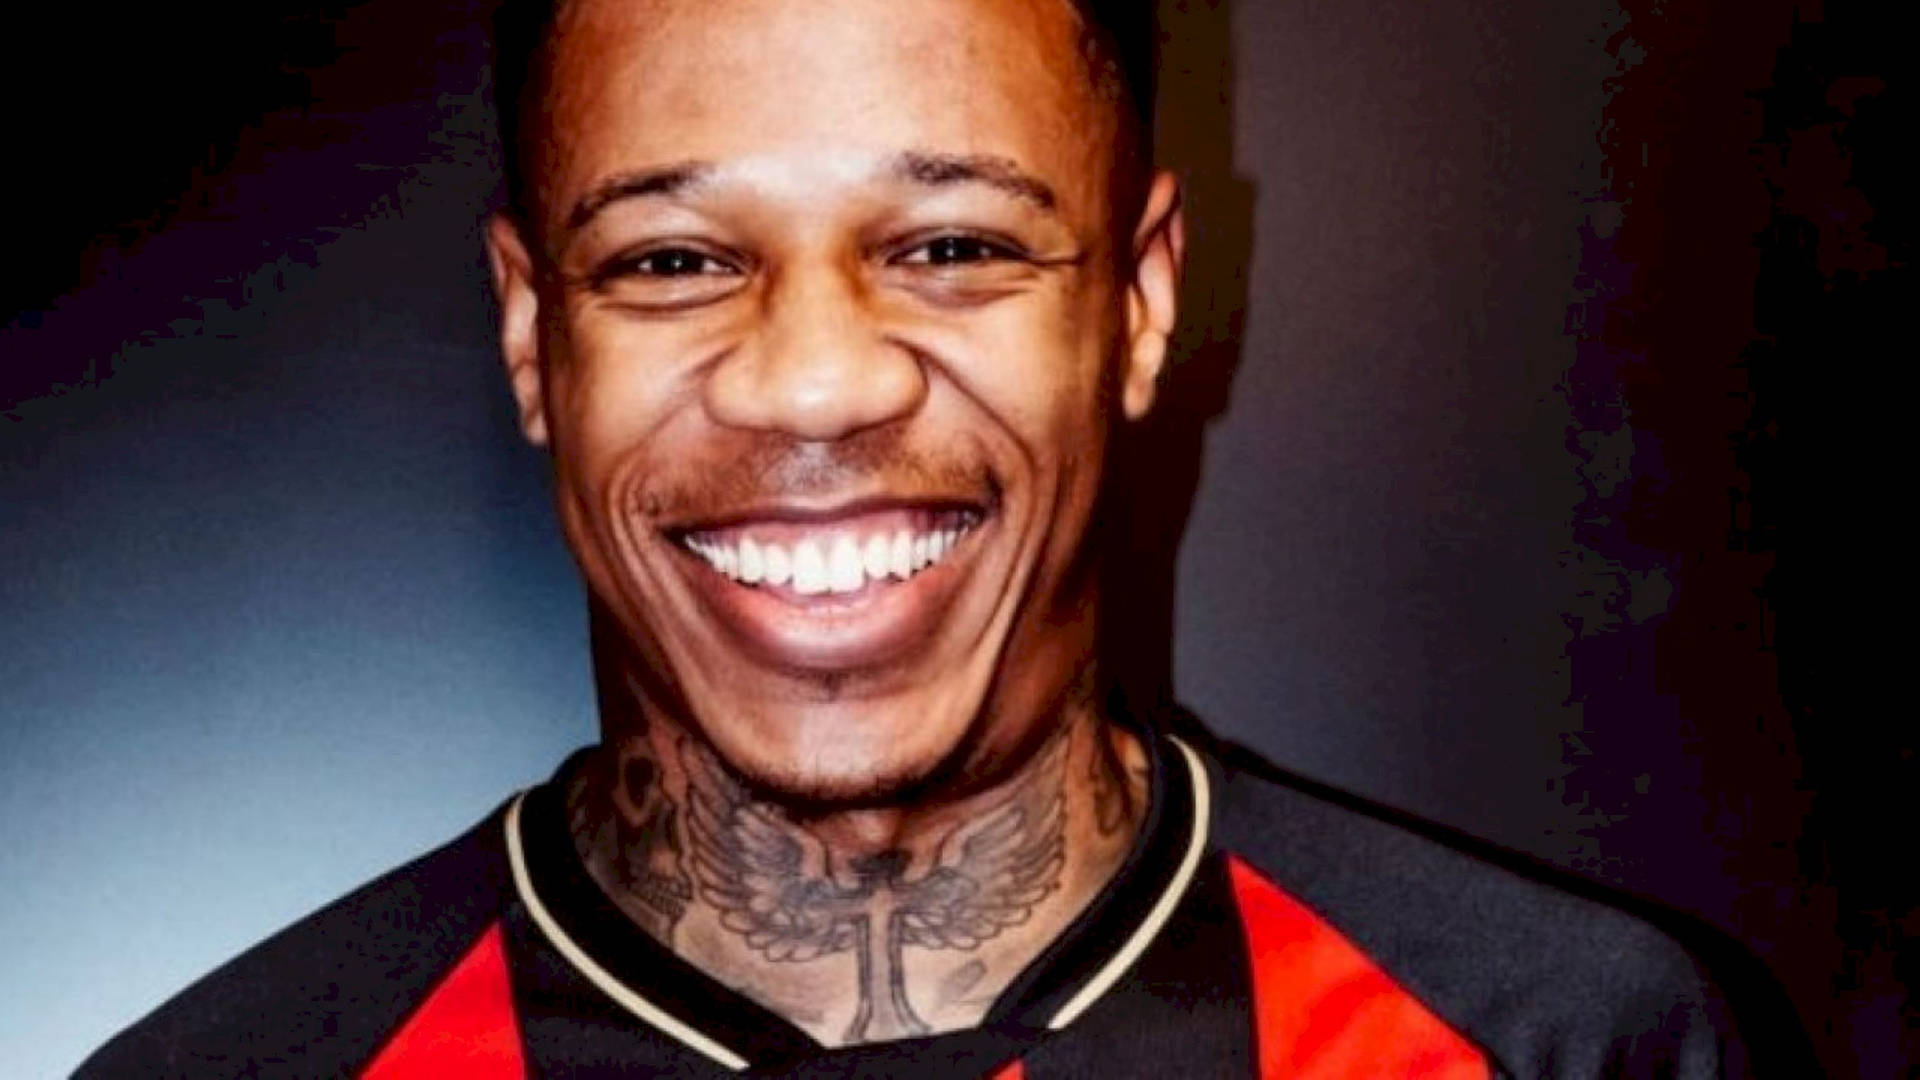 Nathaniel Clyne With A Wide Smile Wallpaper